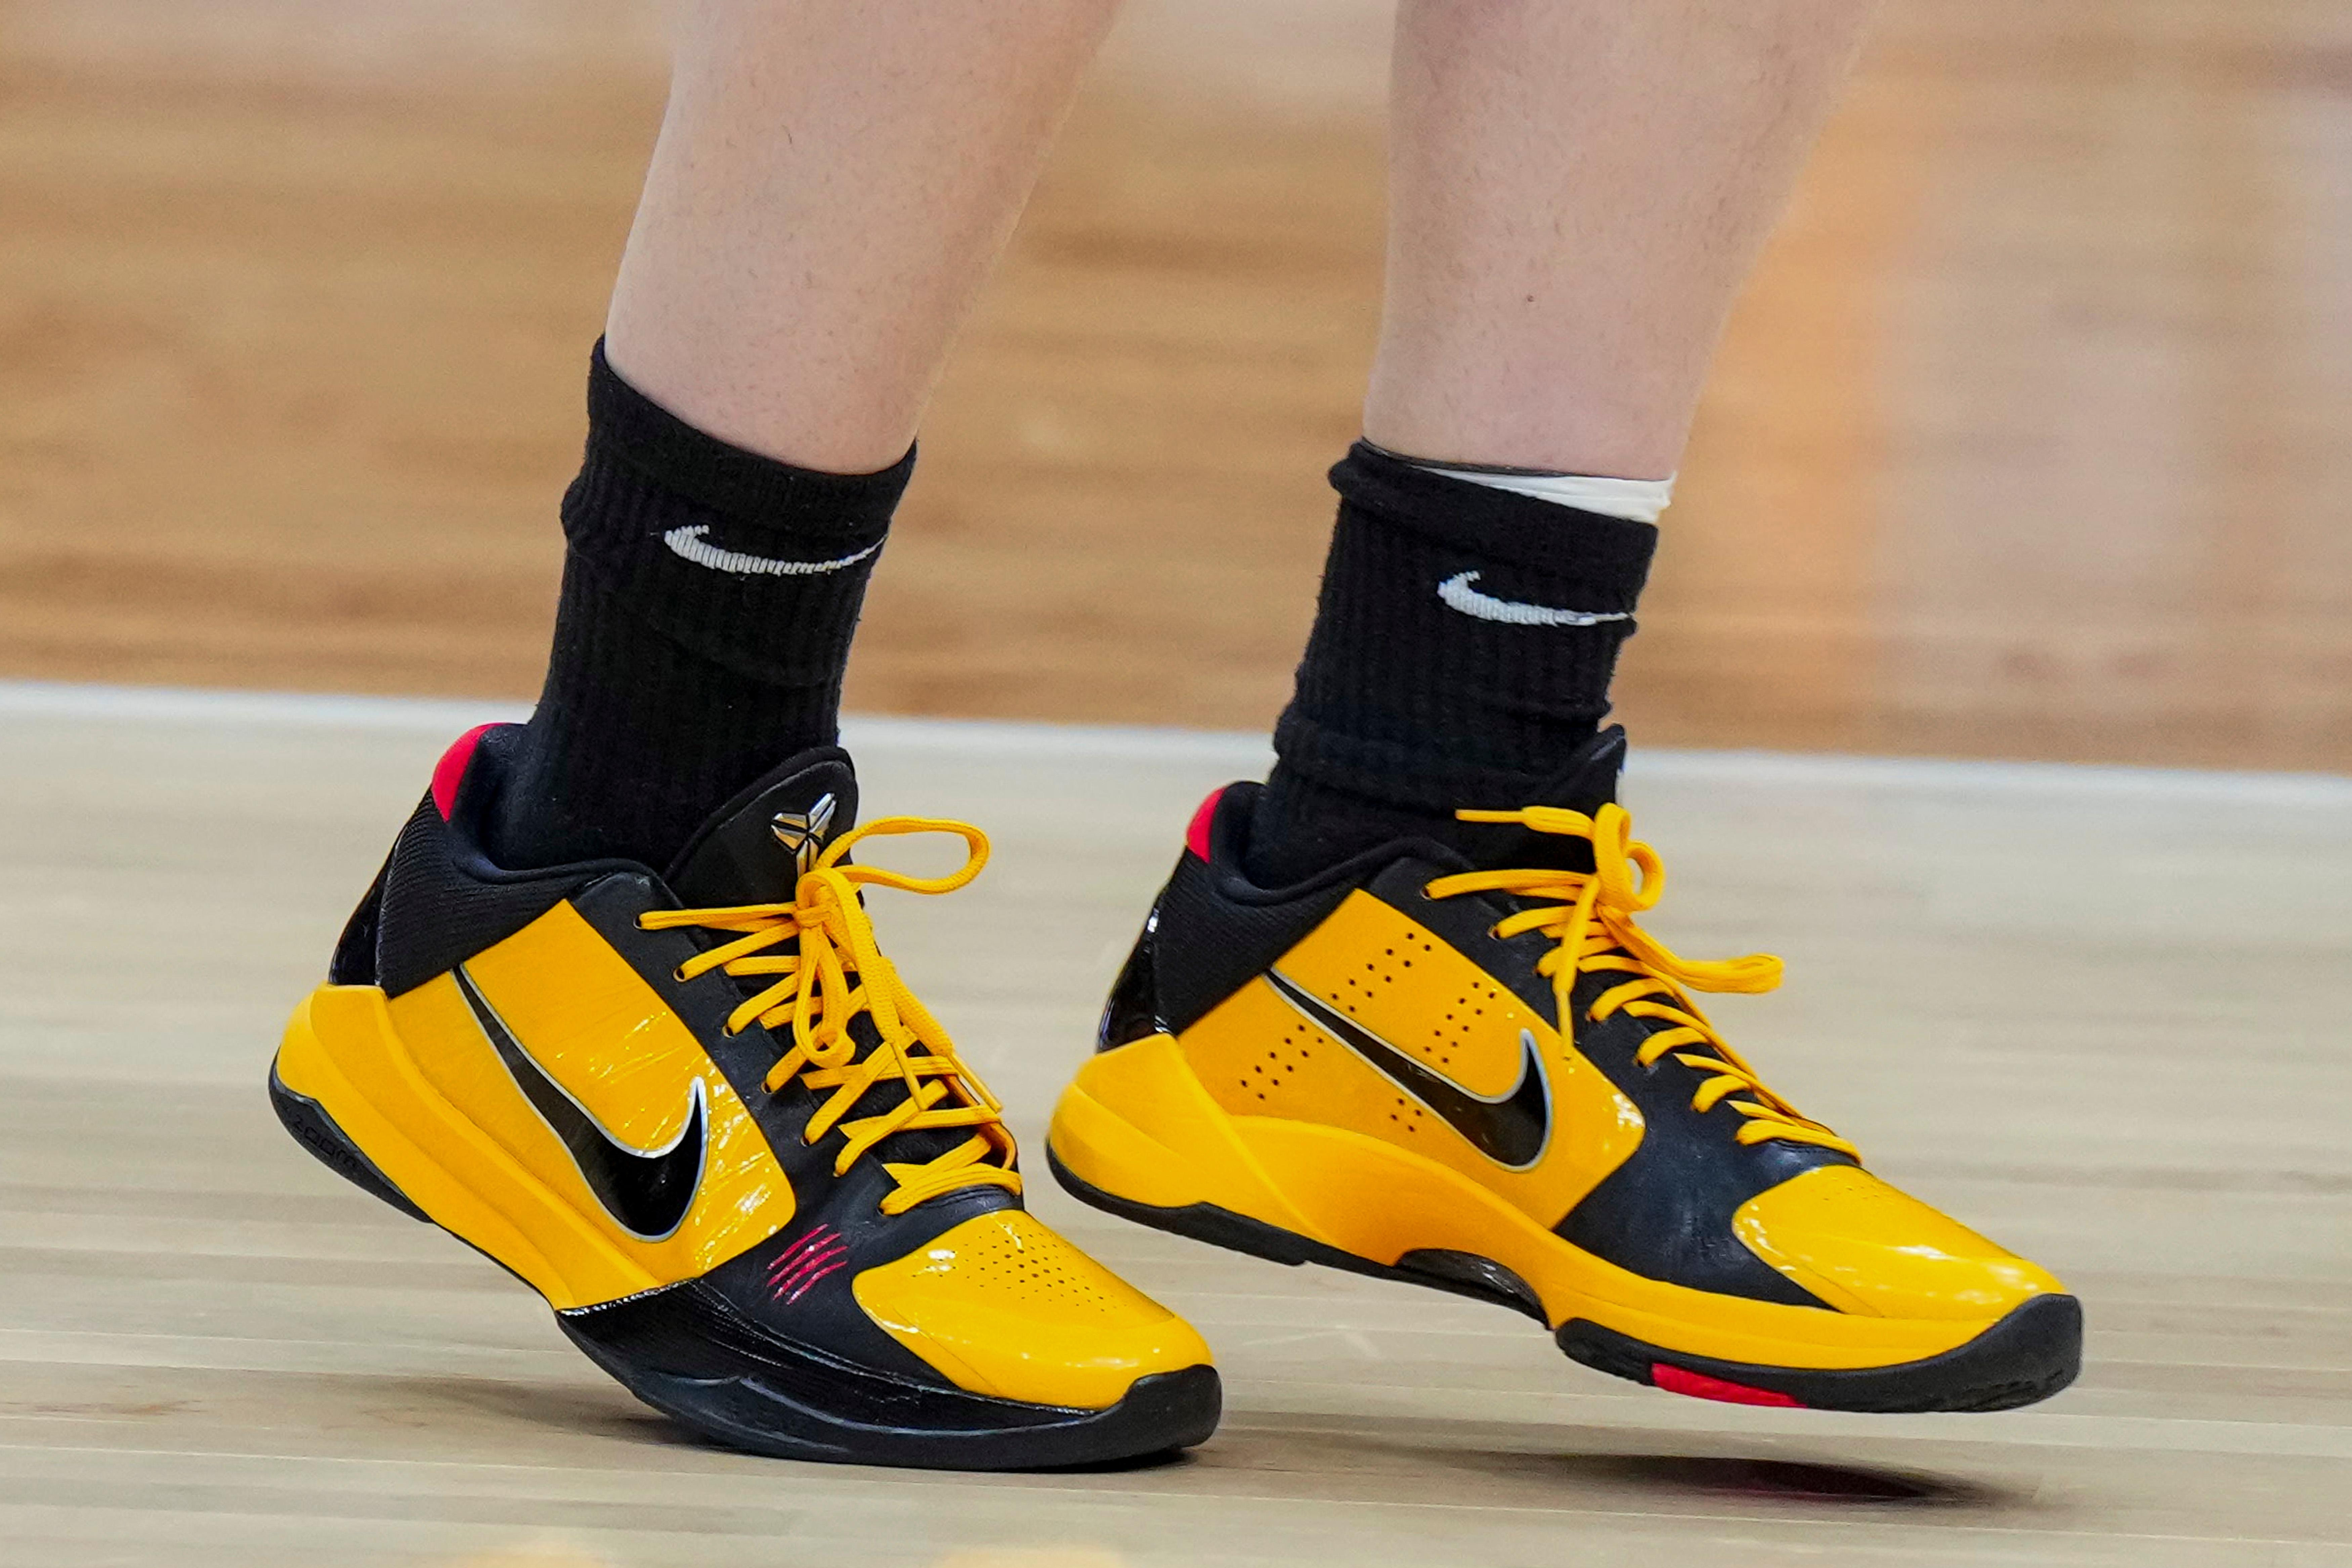 Iowa Hawkeyes guard Caitlin Clark's black and gold Nike sneakers.